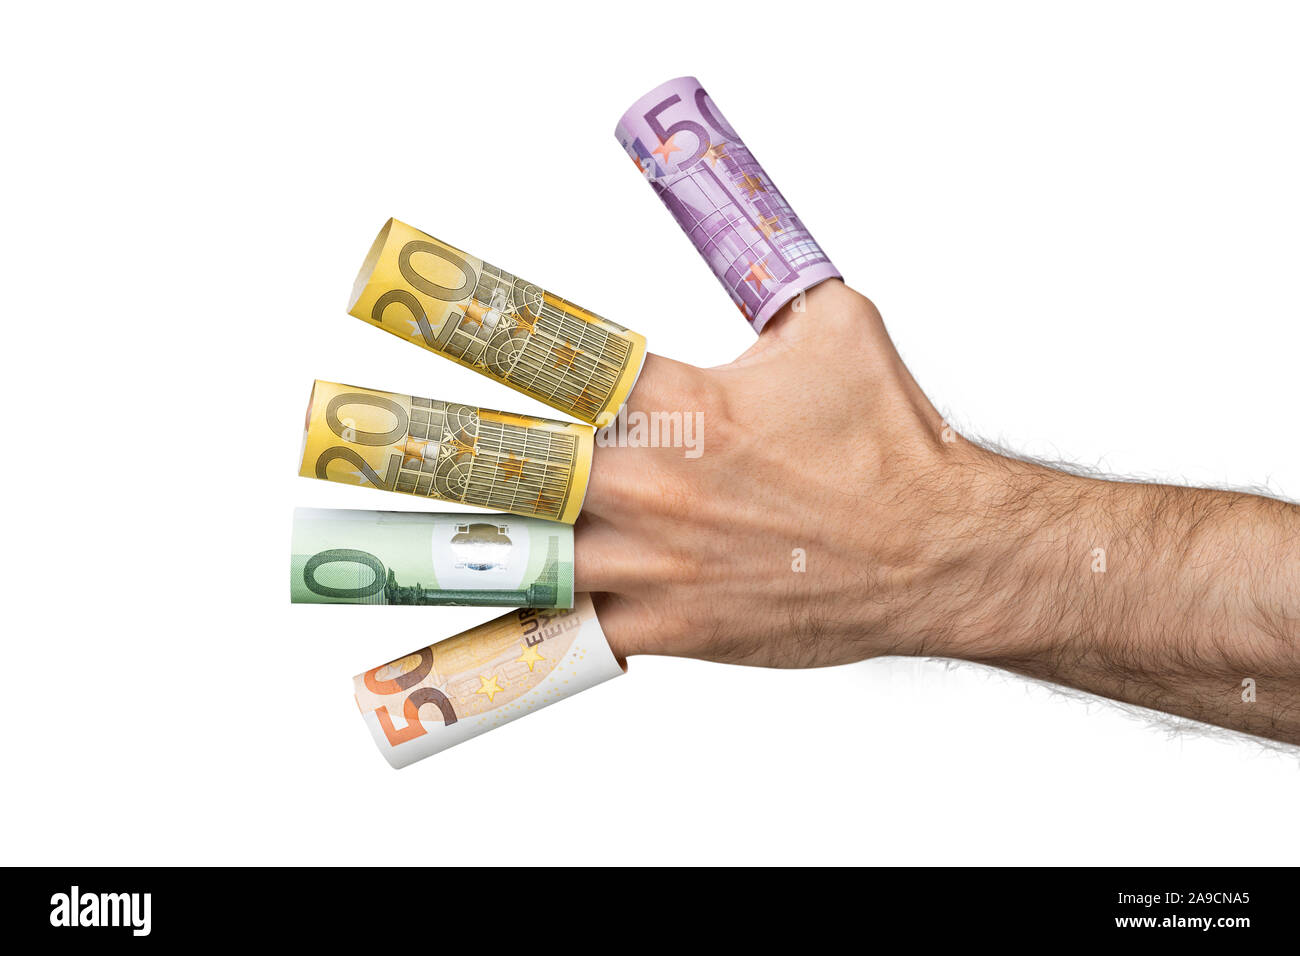 Close-up Of A Man's Hand Showing Rolled Up Euro Banknotes Over His Fingers Stock Photo